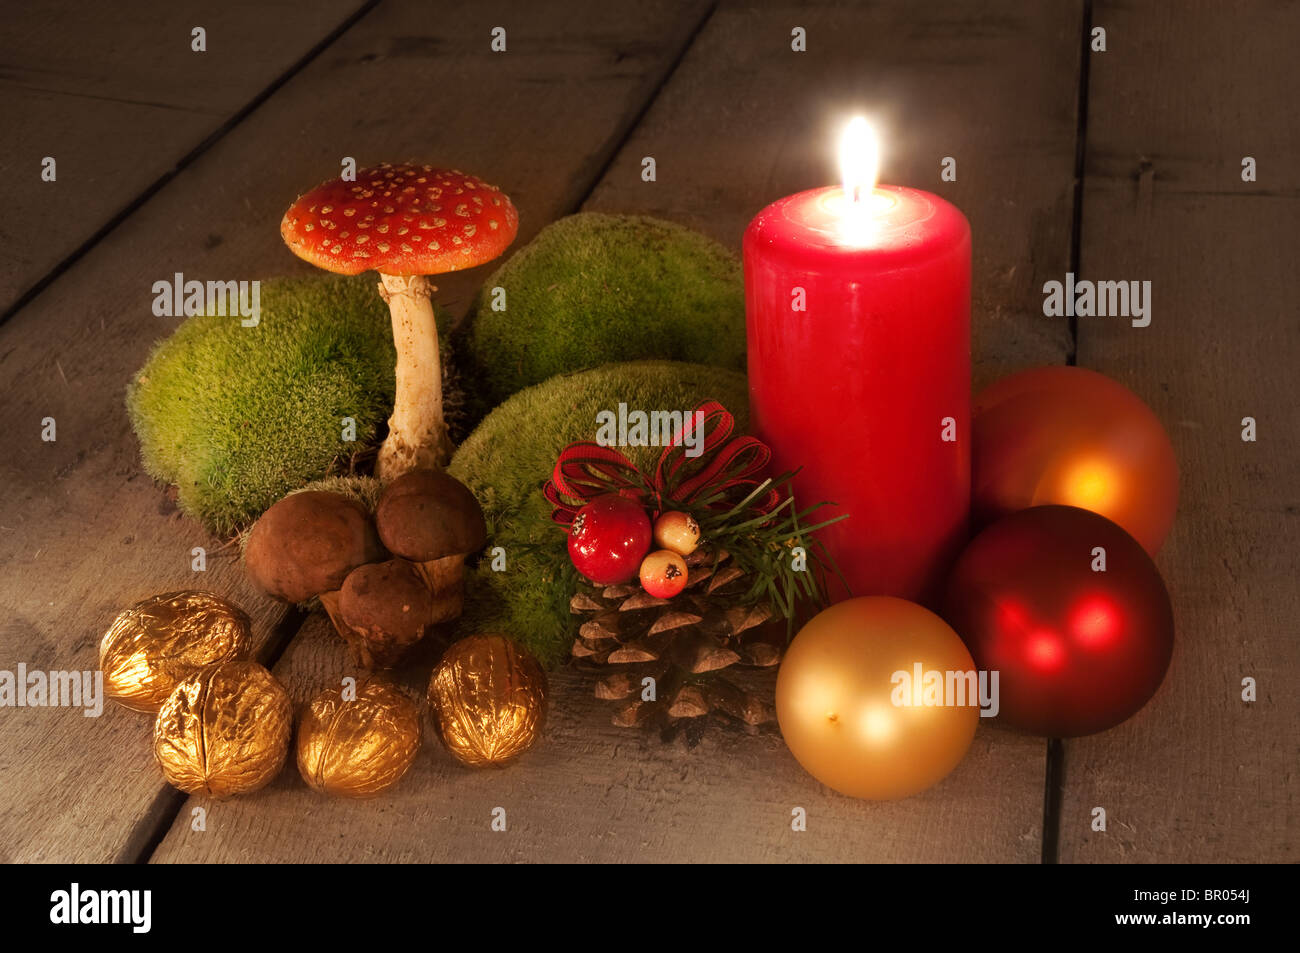 Christmas still life - simple scene with candle, decorative cone, mushrooms and golden walnuts Stock Photo